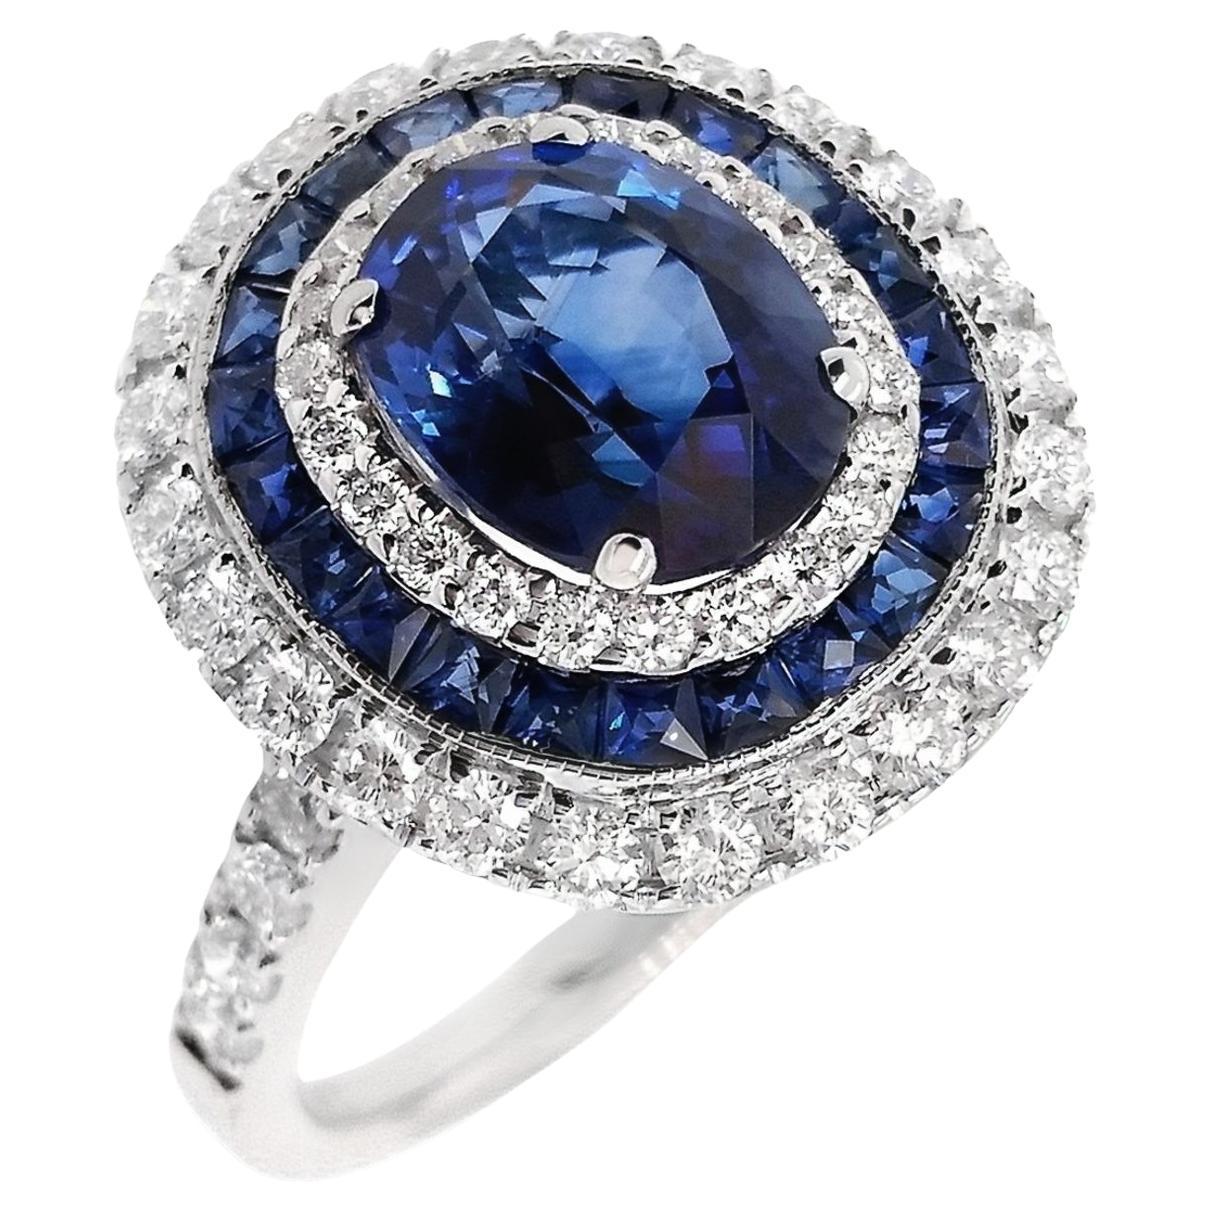 IGI Certified 2.87ct Natural Sapphires and 0.74ct Diamonds 18k White Gold Ring